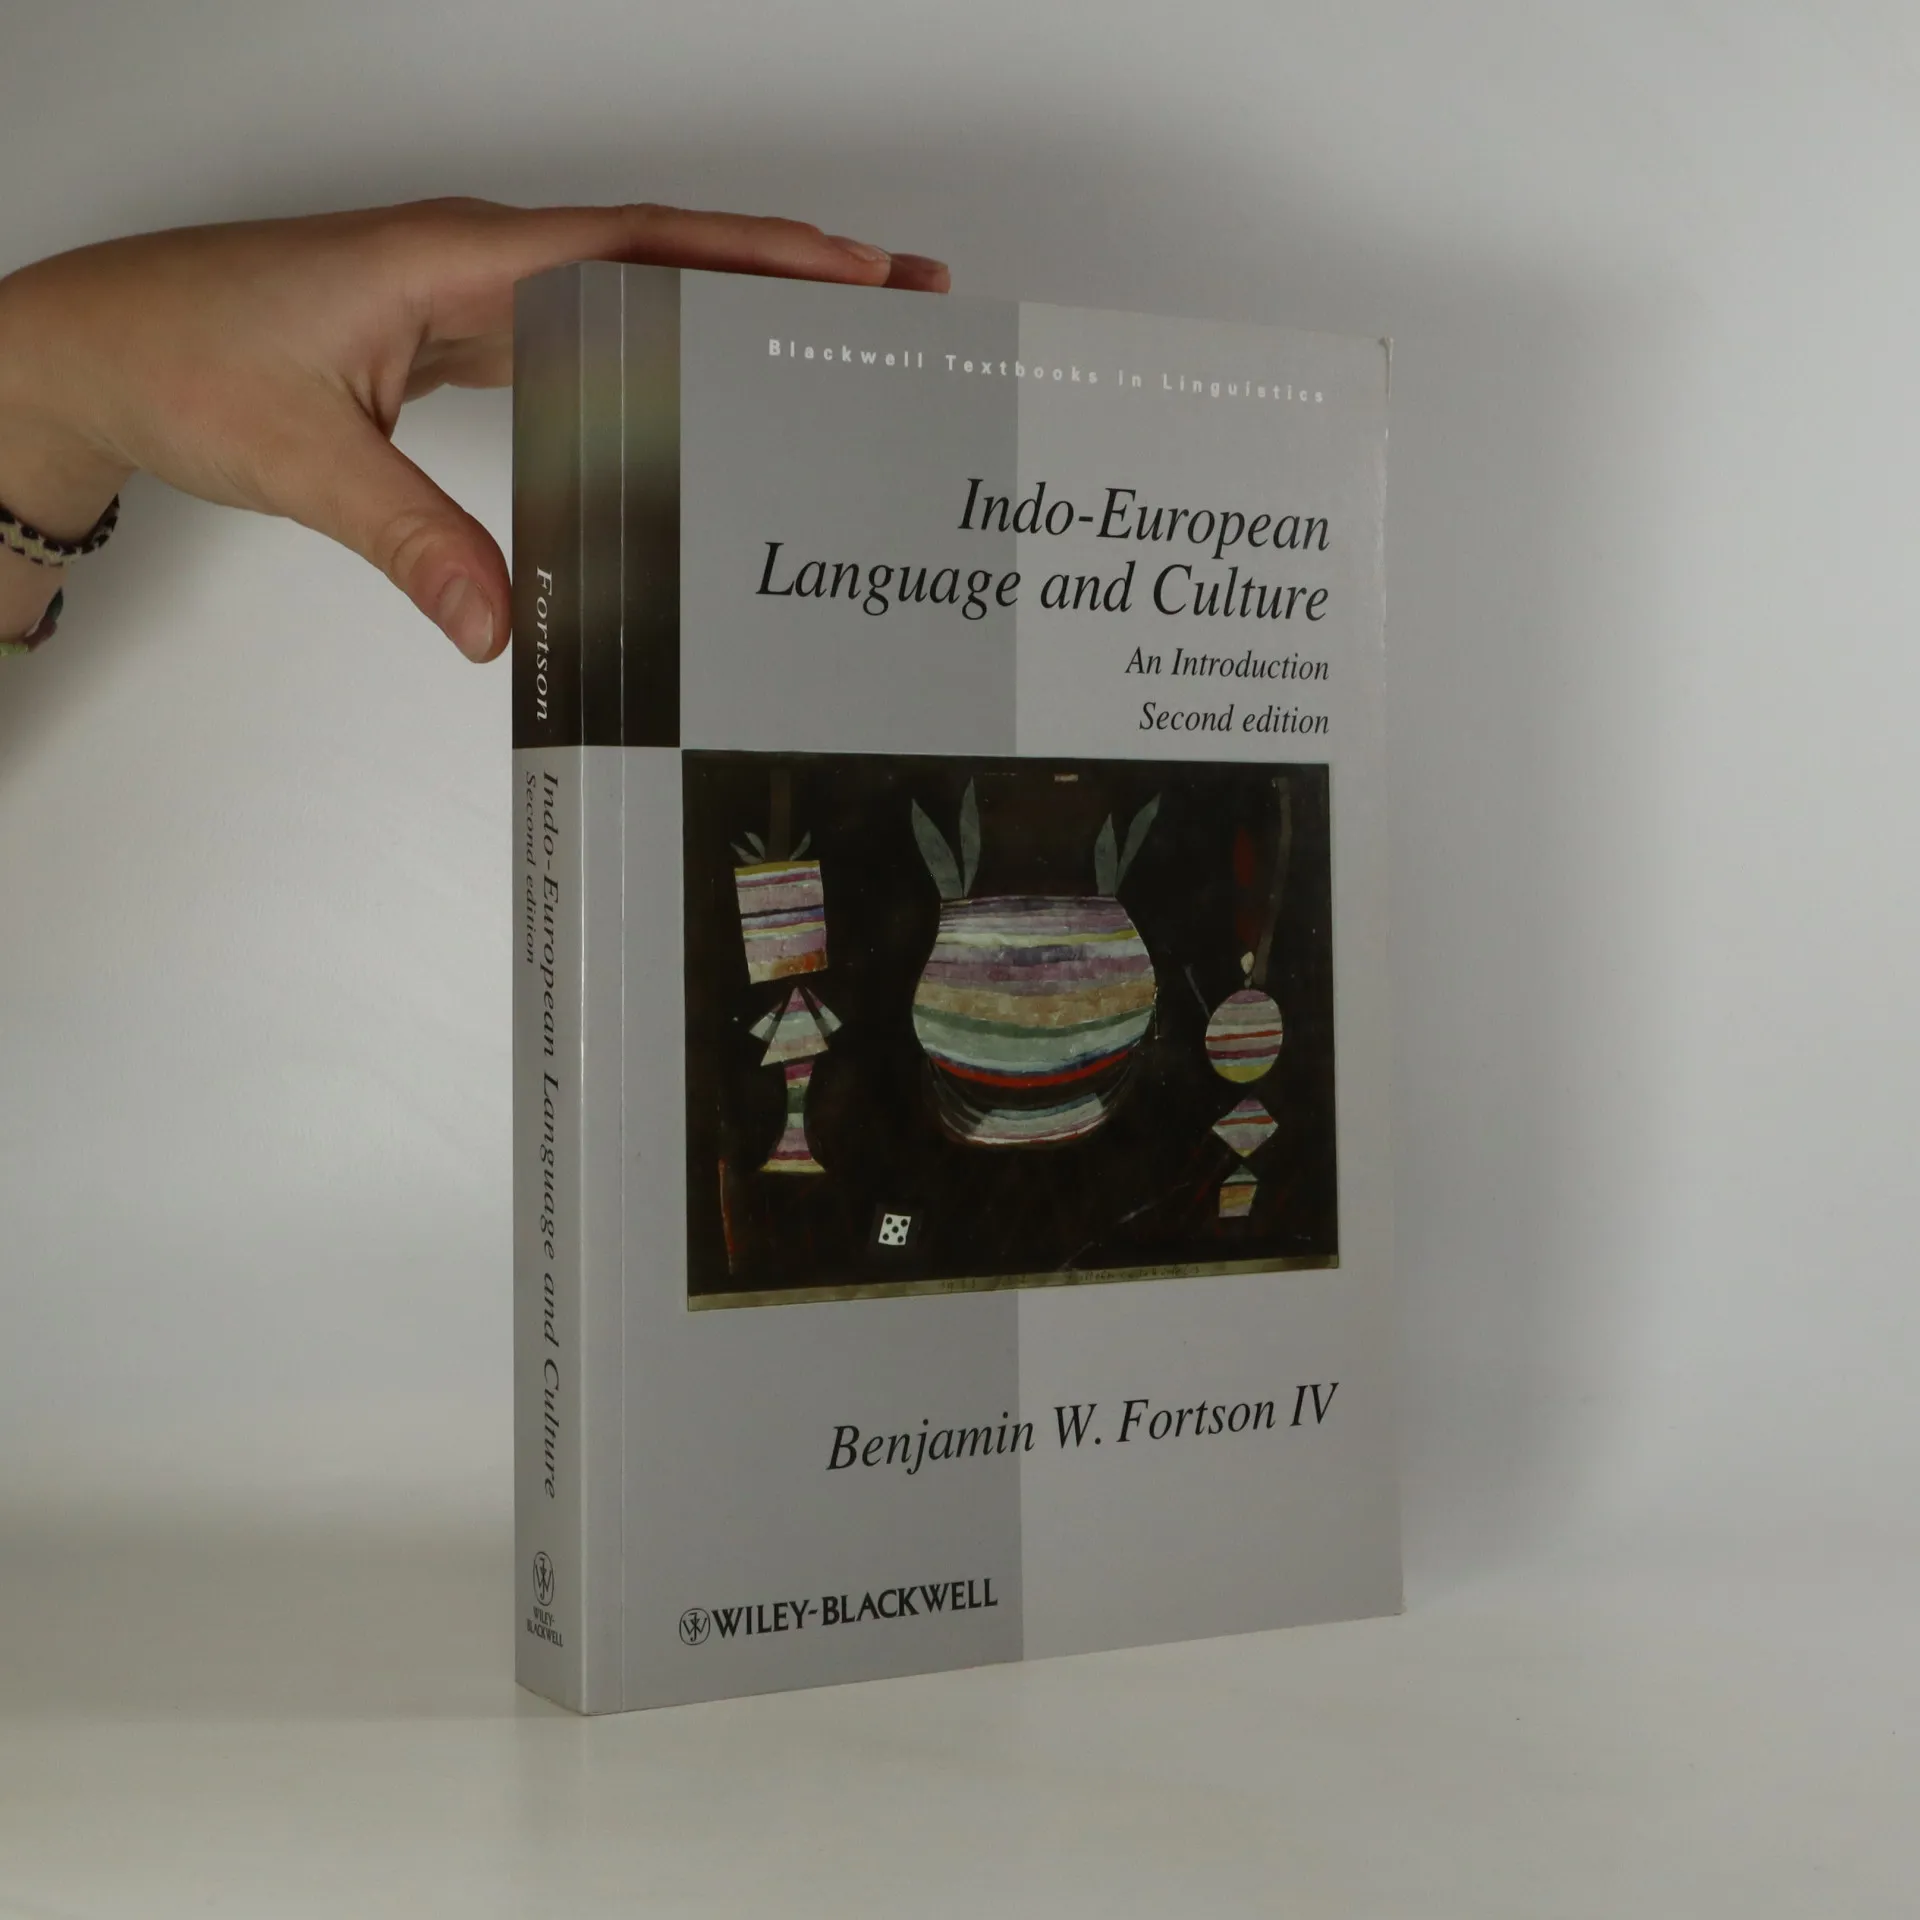 Indo-European Language and Culture: An Introduction (Blackwell Textbooks in  Linguistics): Fortson IV, Benjamin W.: 9781405103152: : Books